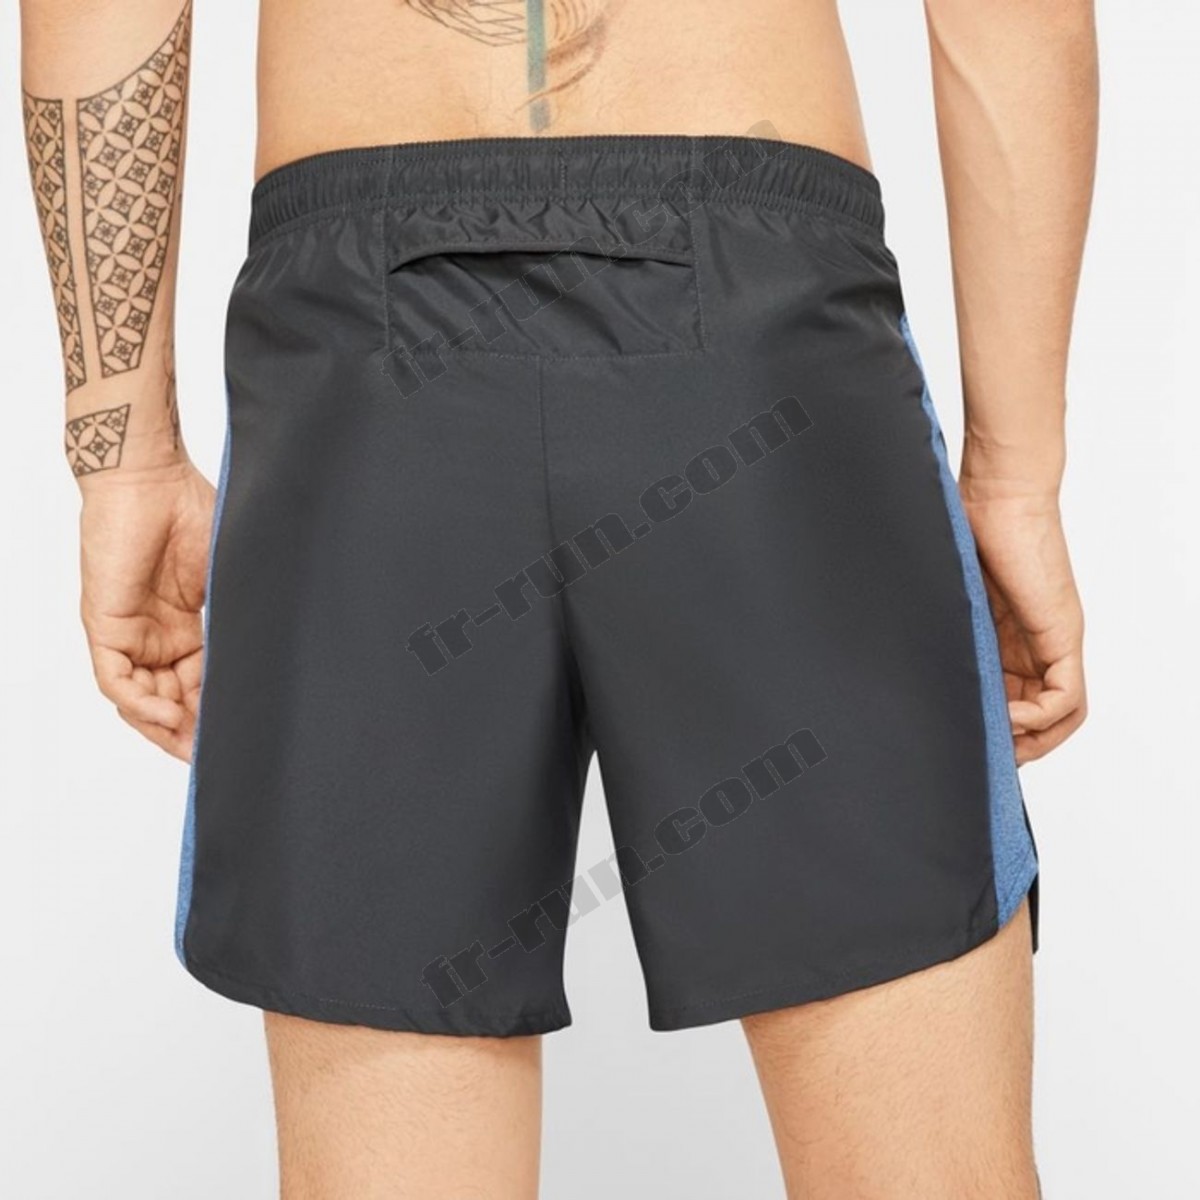 Nike/SHORT running homme NIKE CHLLGR SHORT 7IN BF GX FF √ Nouveau style √ Soldes - -1